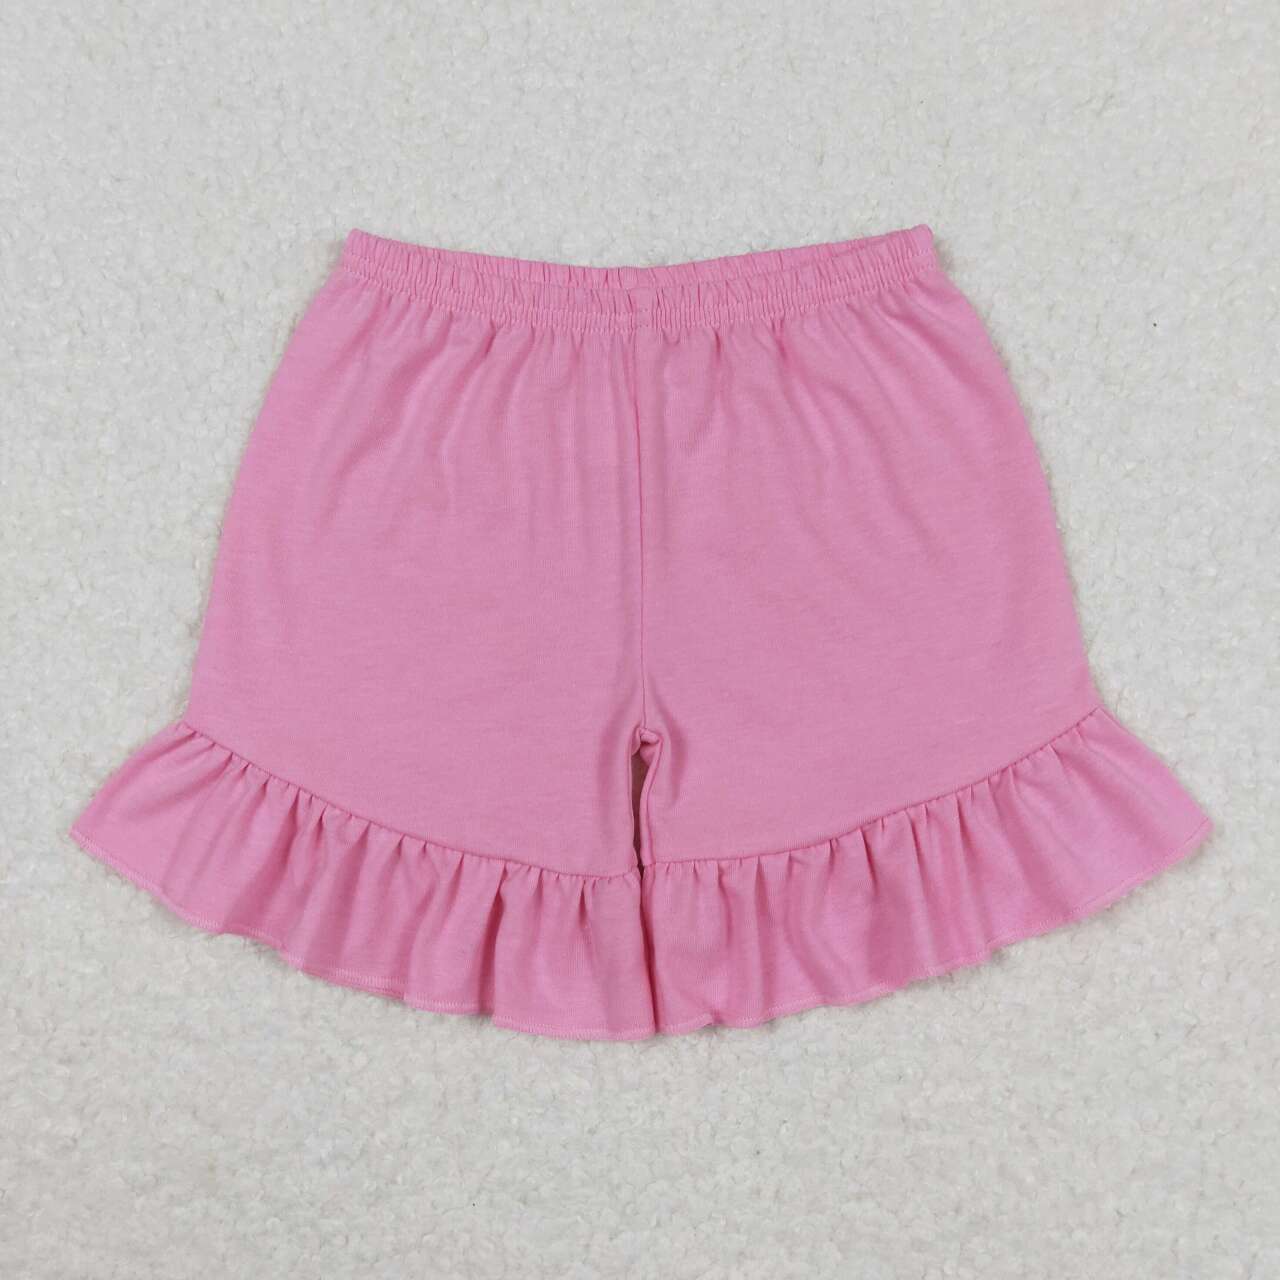 SS0271 Blue Solid Color Knit Cotton Double Ruffle Shorts